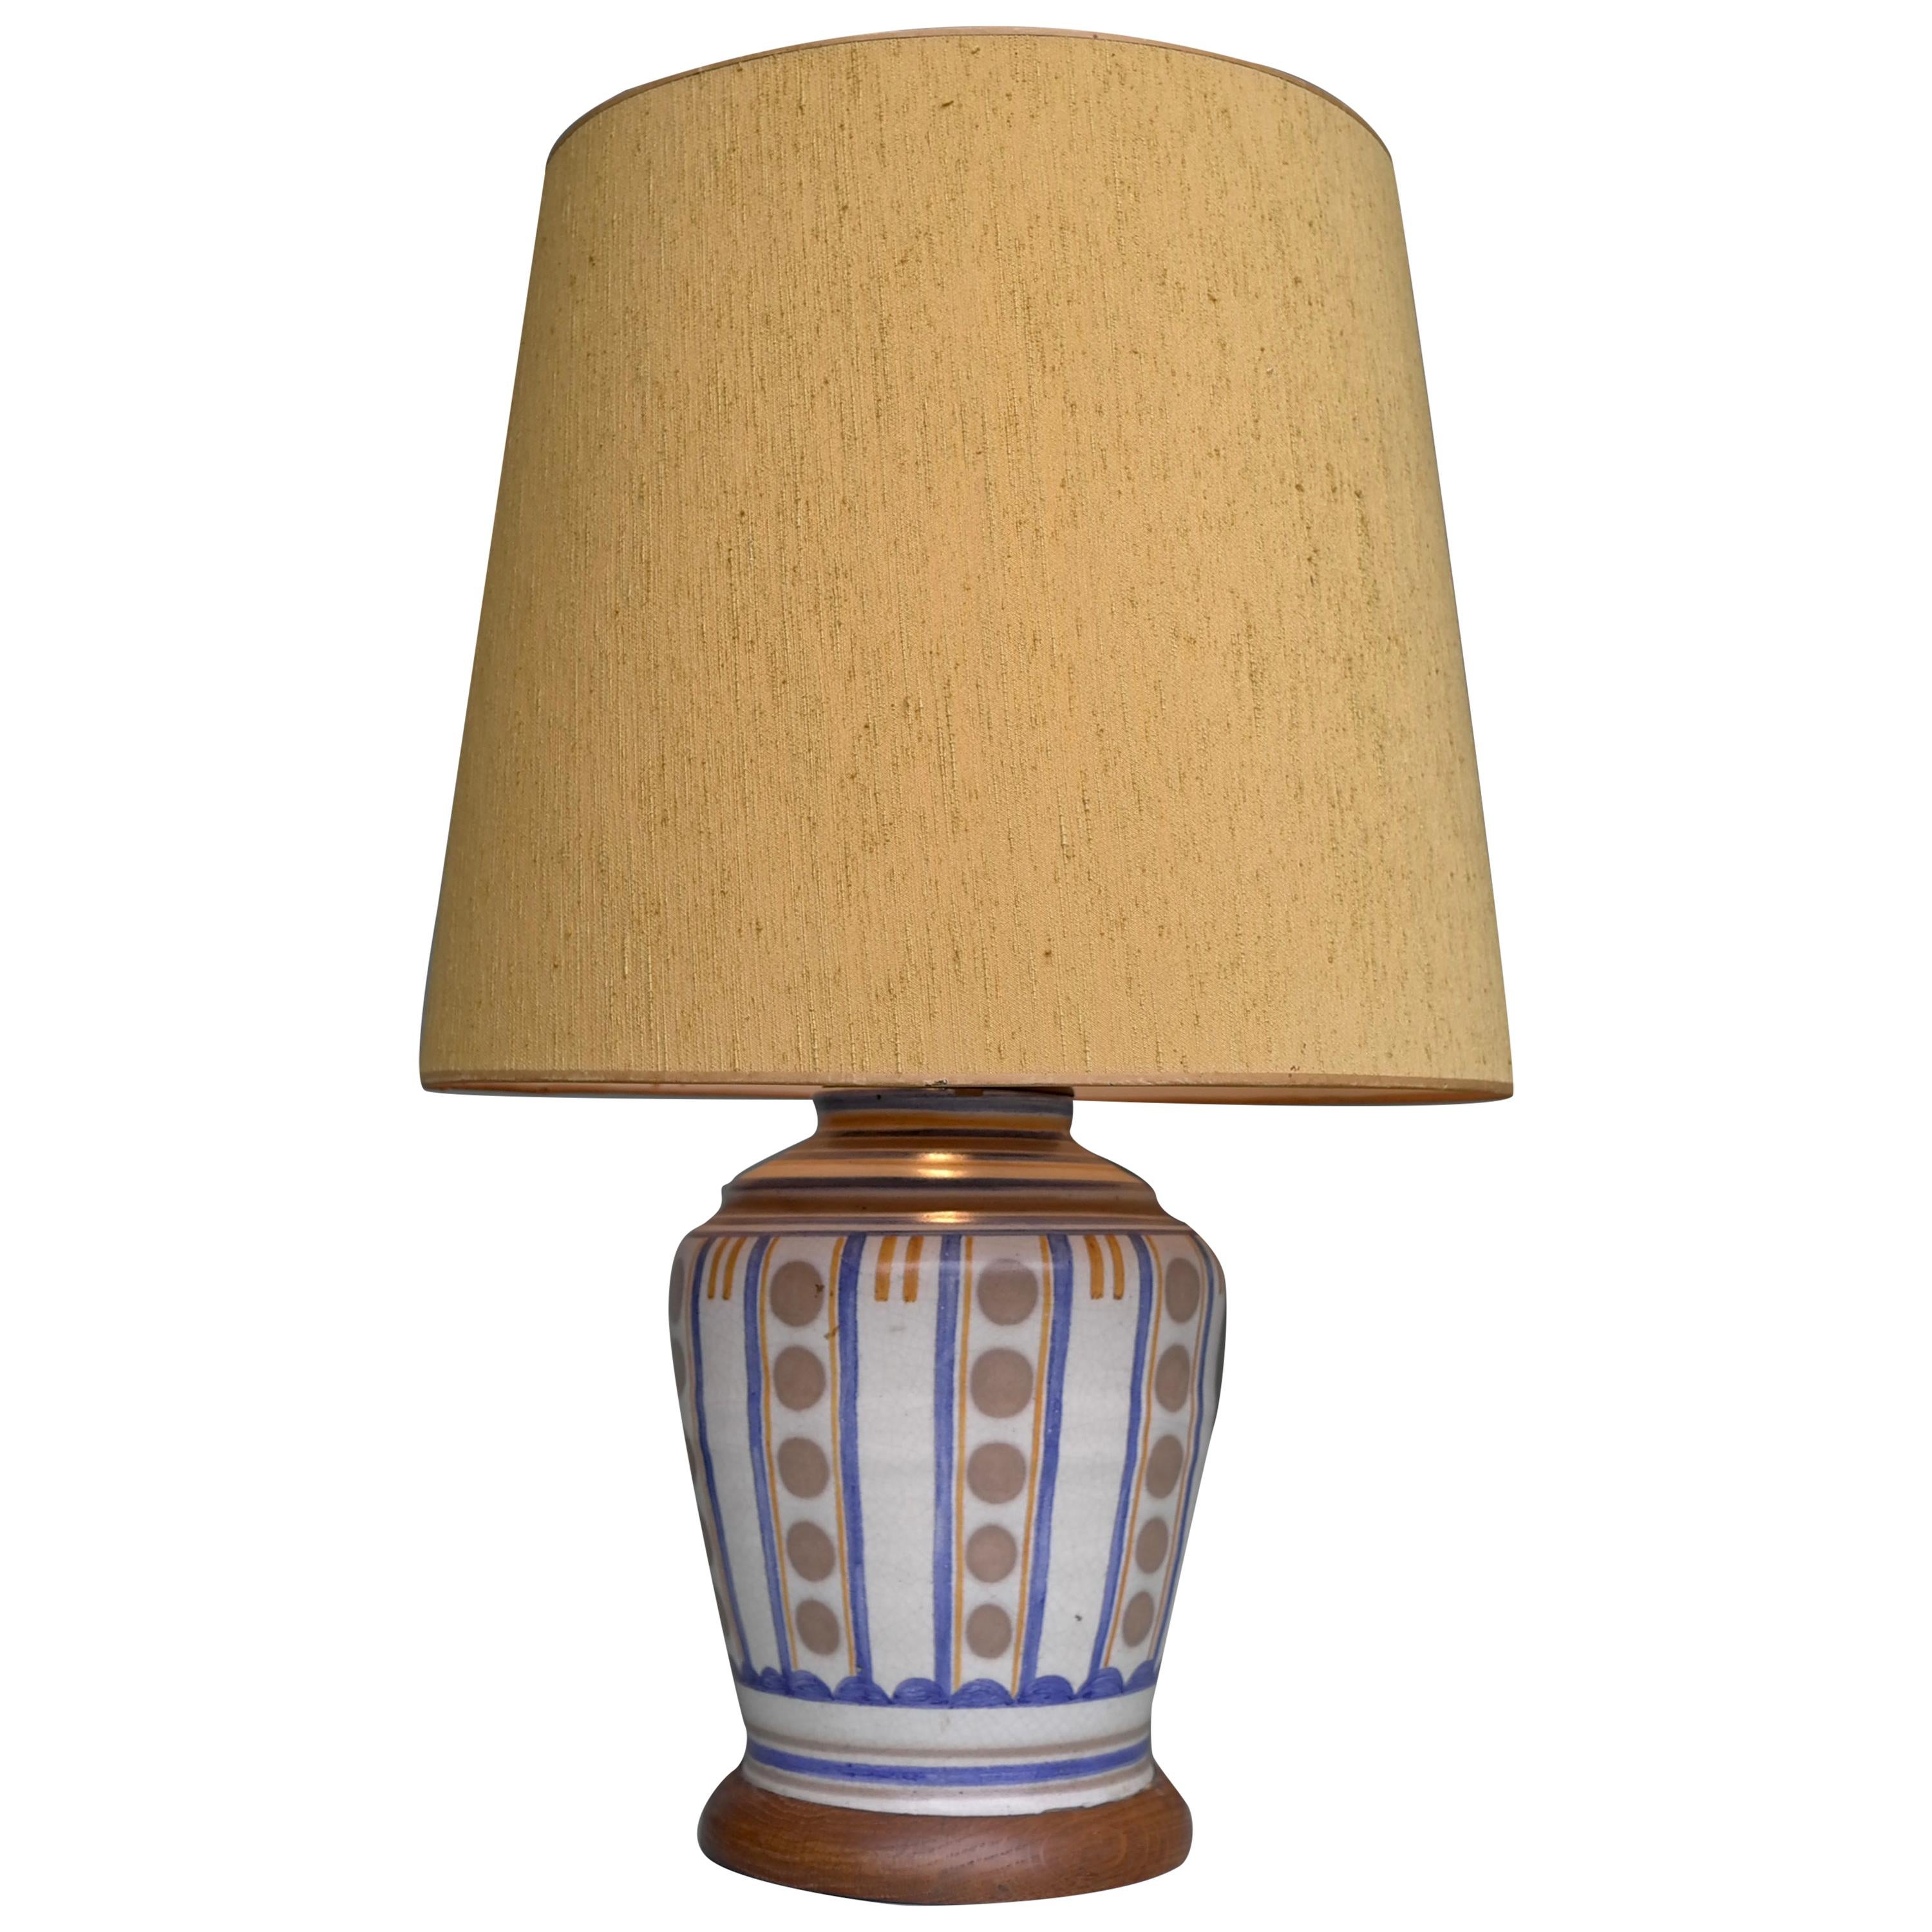 Art Deco French Ceramic and Wood Table Lamp with Silk Lampshade, France, 1940s